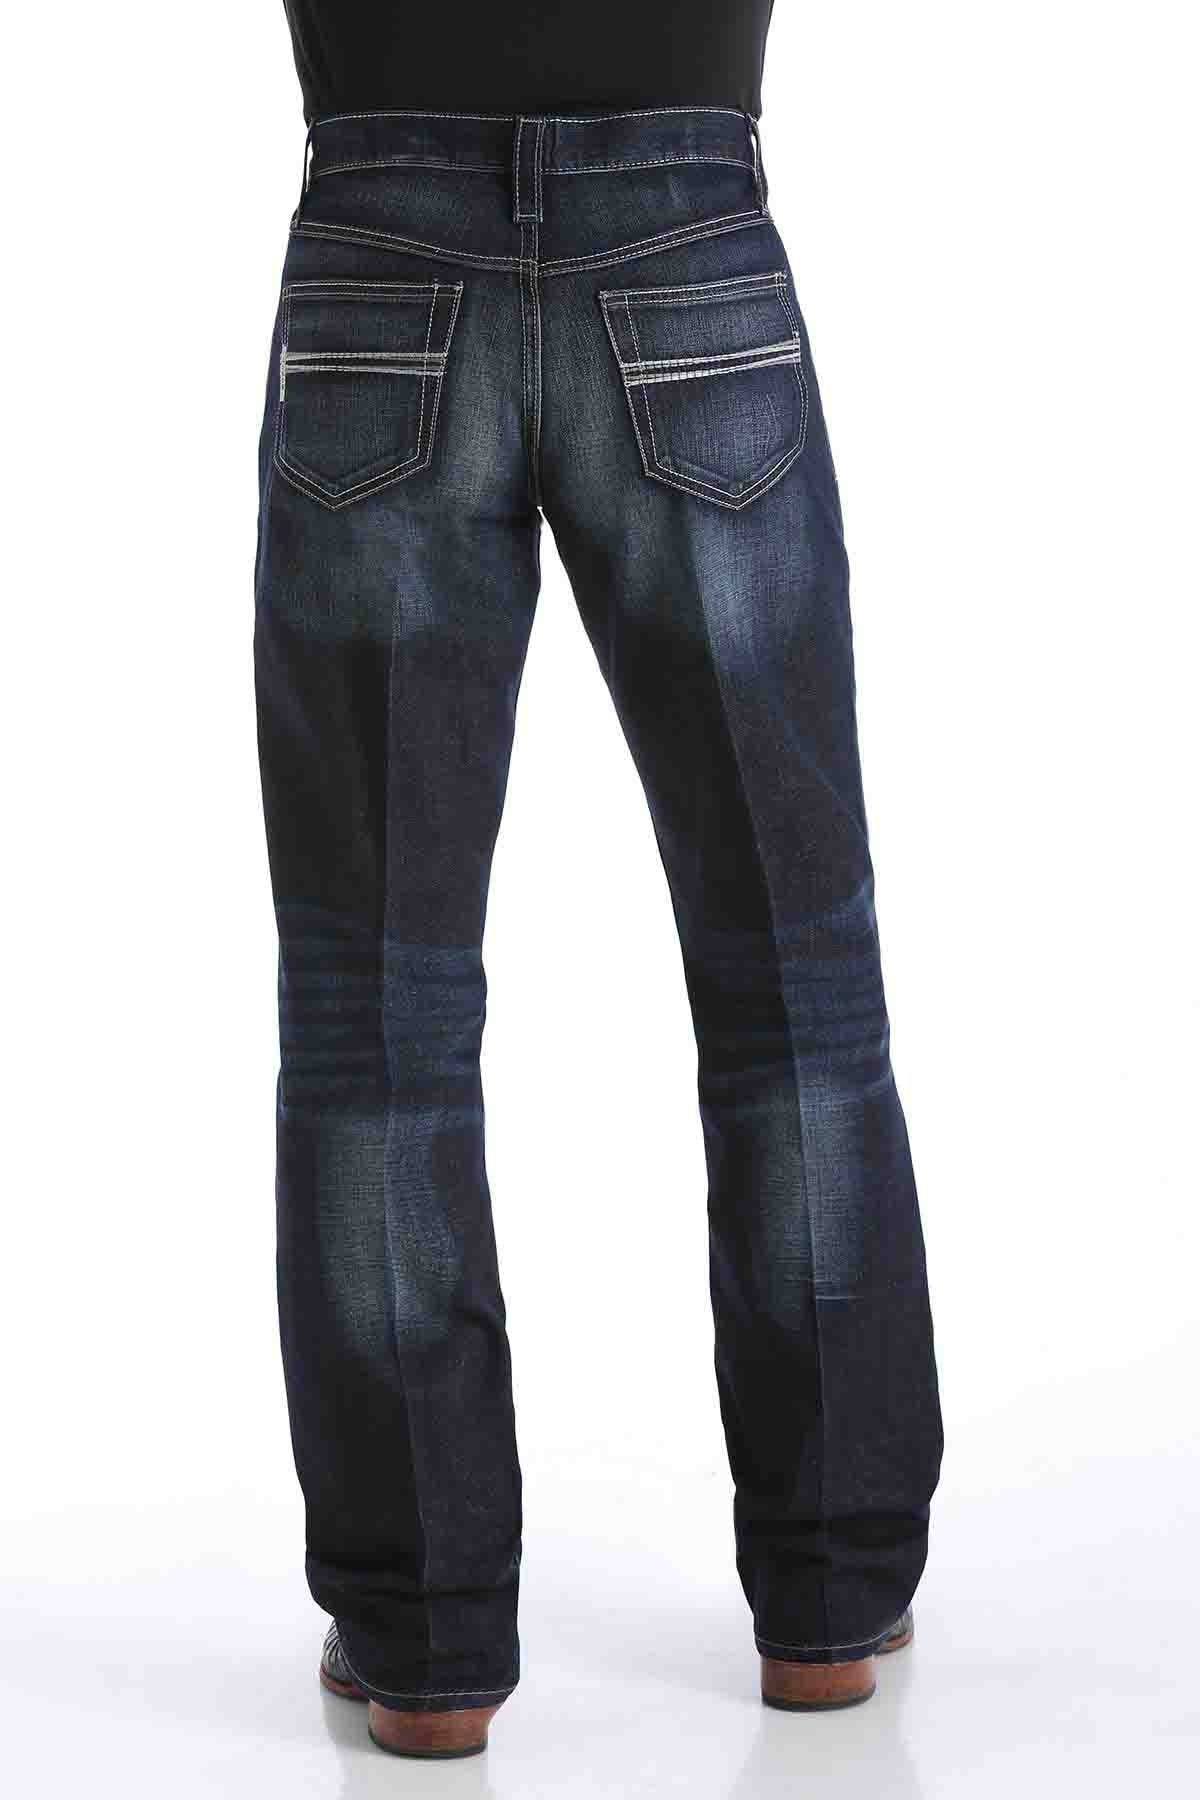 Cinch Carter 2.4 Jeans Rinse